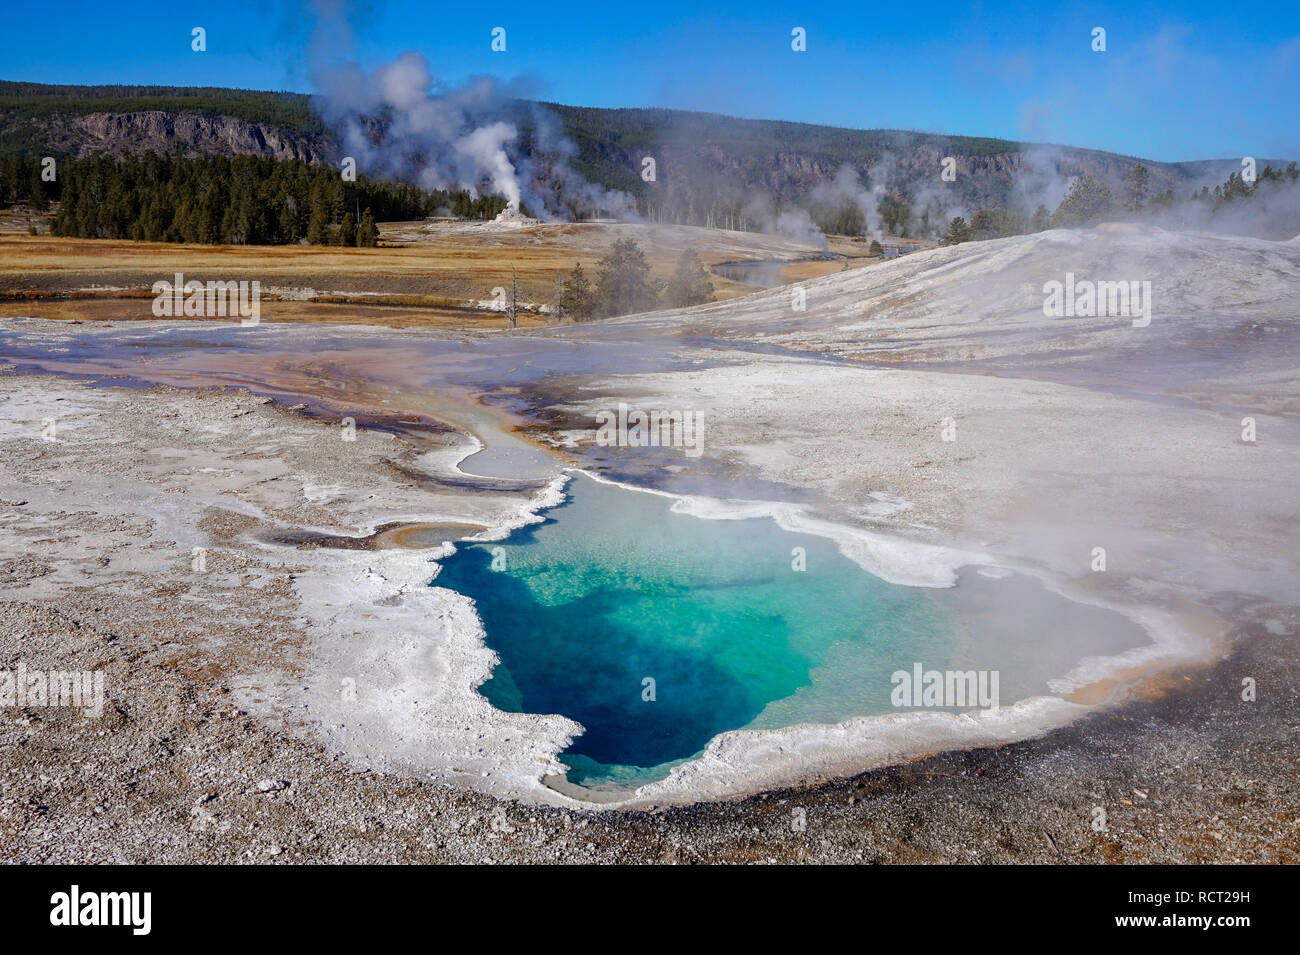 Bright blue turquoise pond (thermal feature) at Yellowstone National Park, with smoke (steam) and mountains in the background. Stock Photo